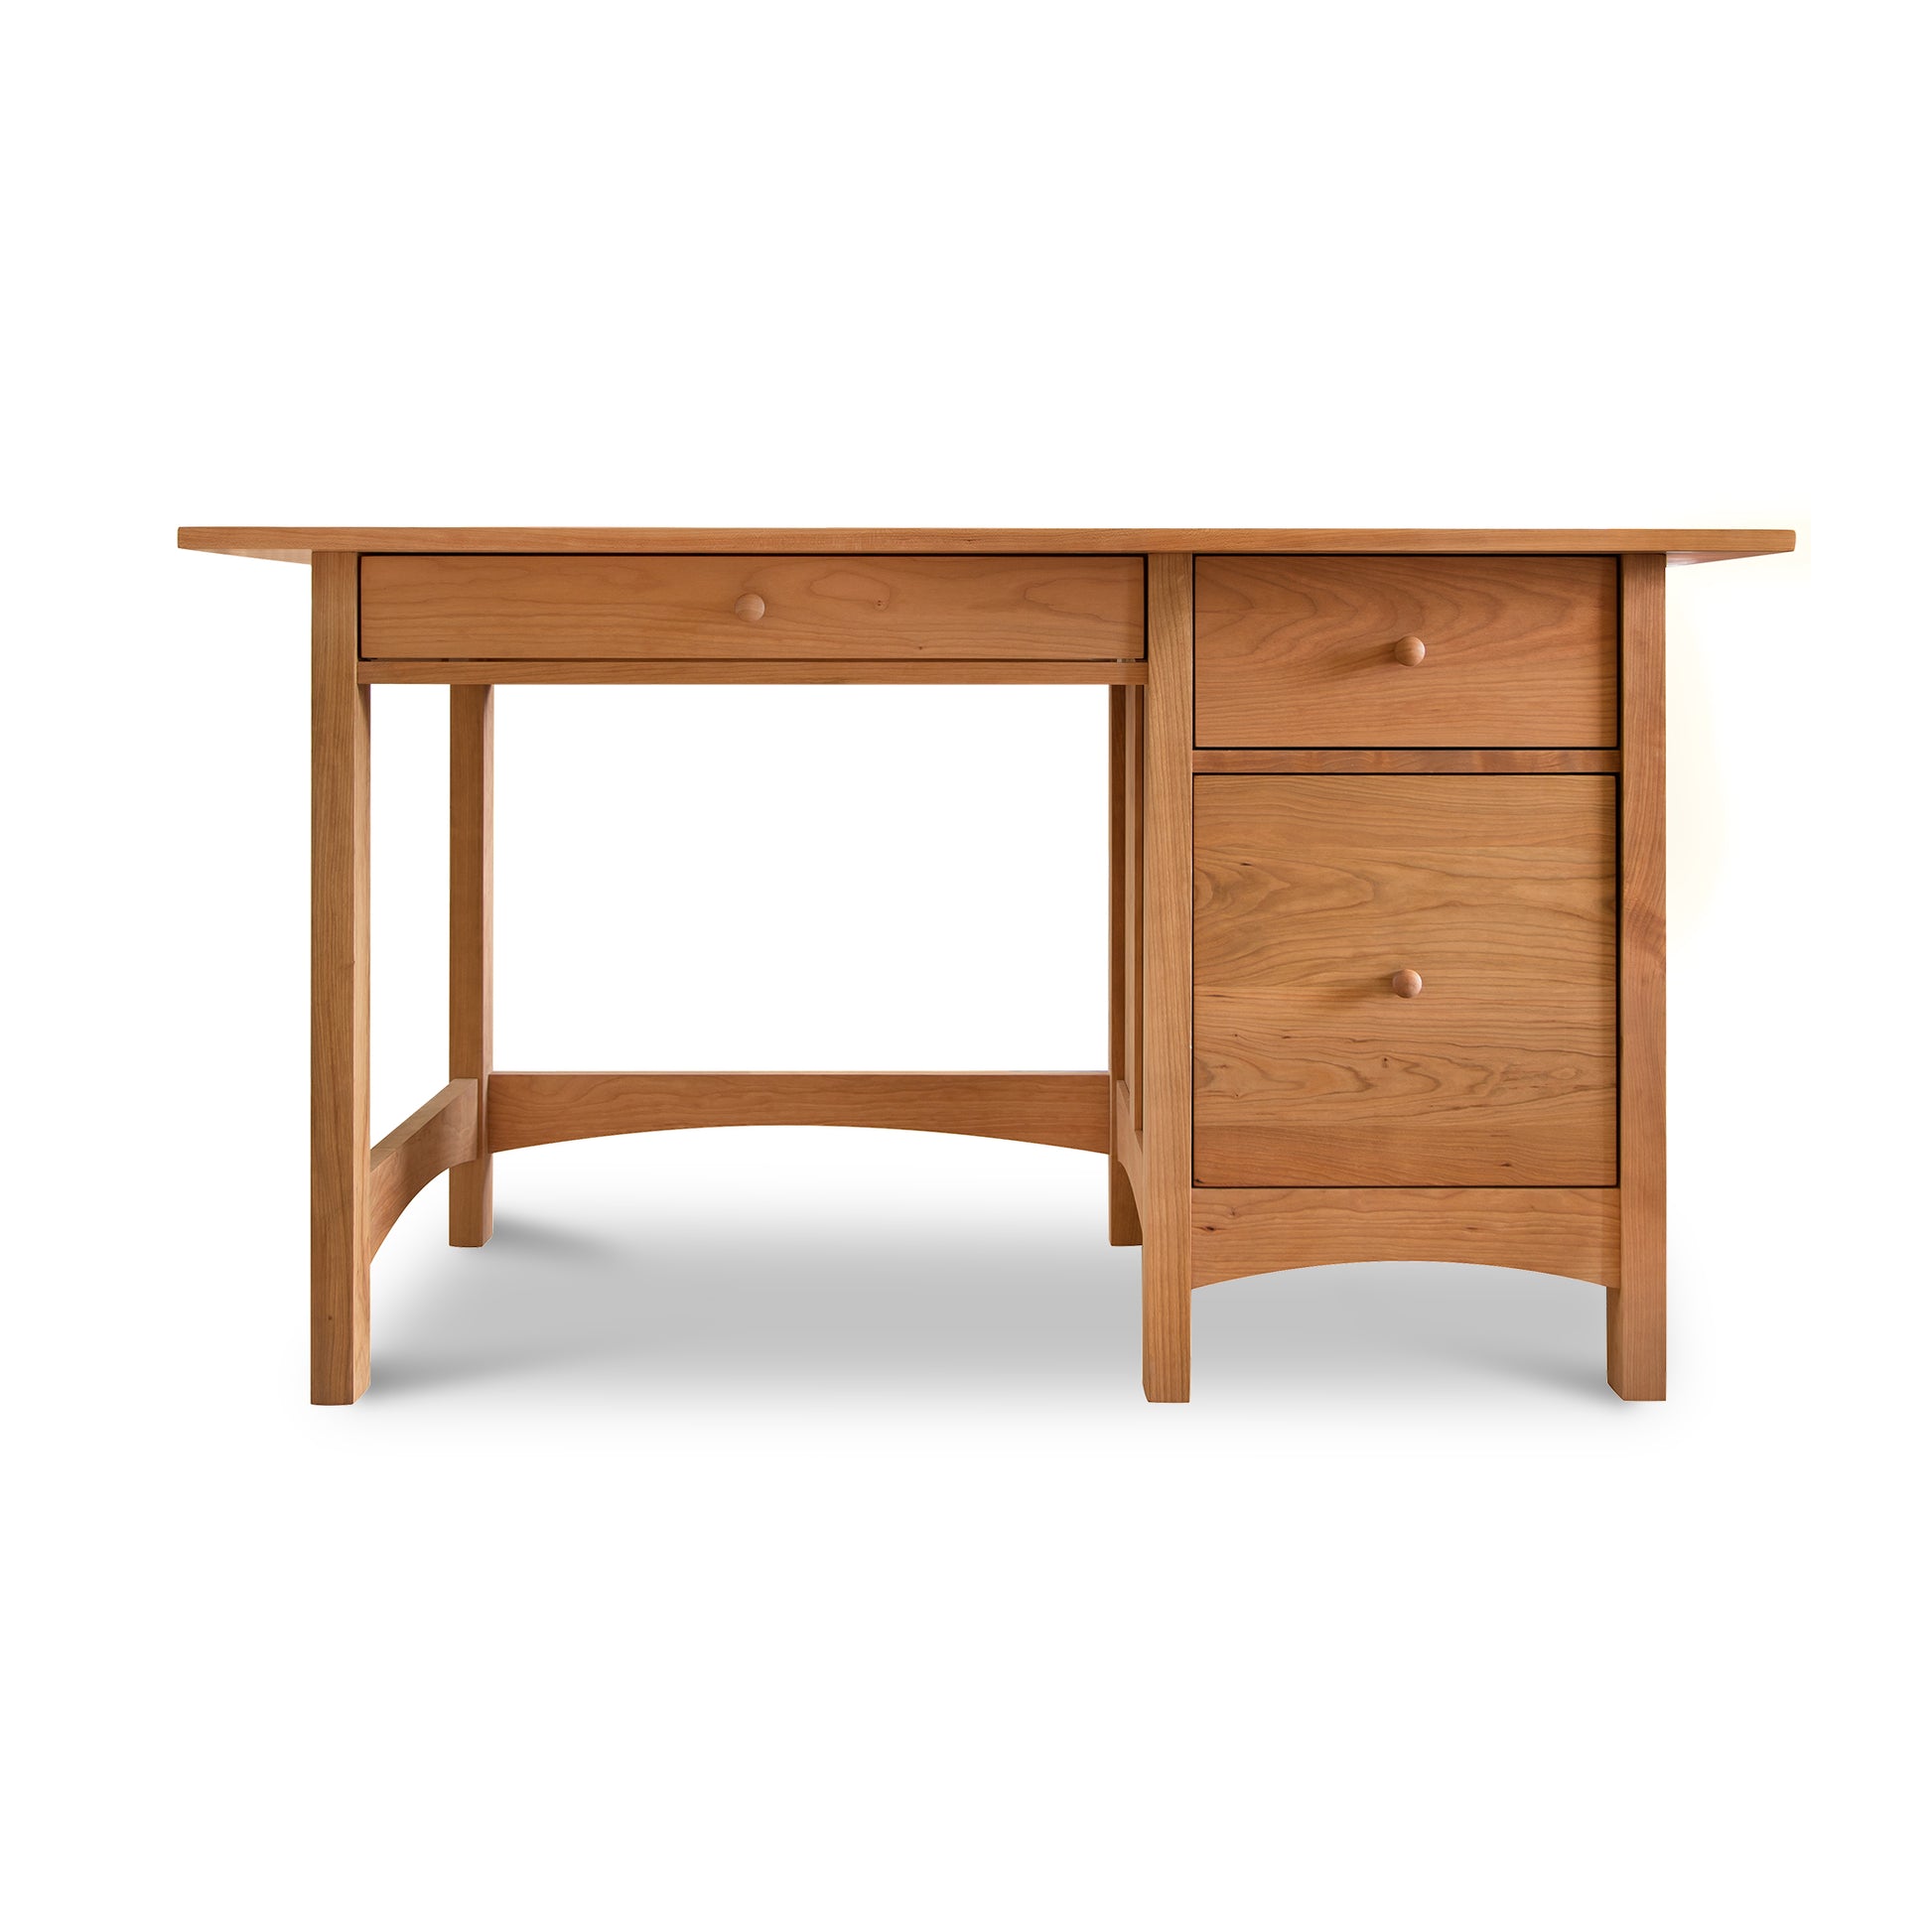 A Burlington Shaker Study Desk by Vermont Furniture Designs, with drawers on one side, isolated on a white background.